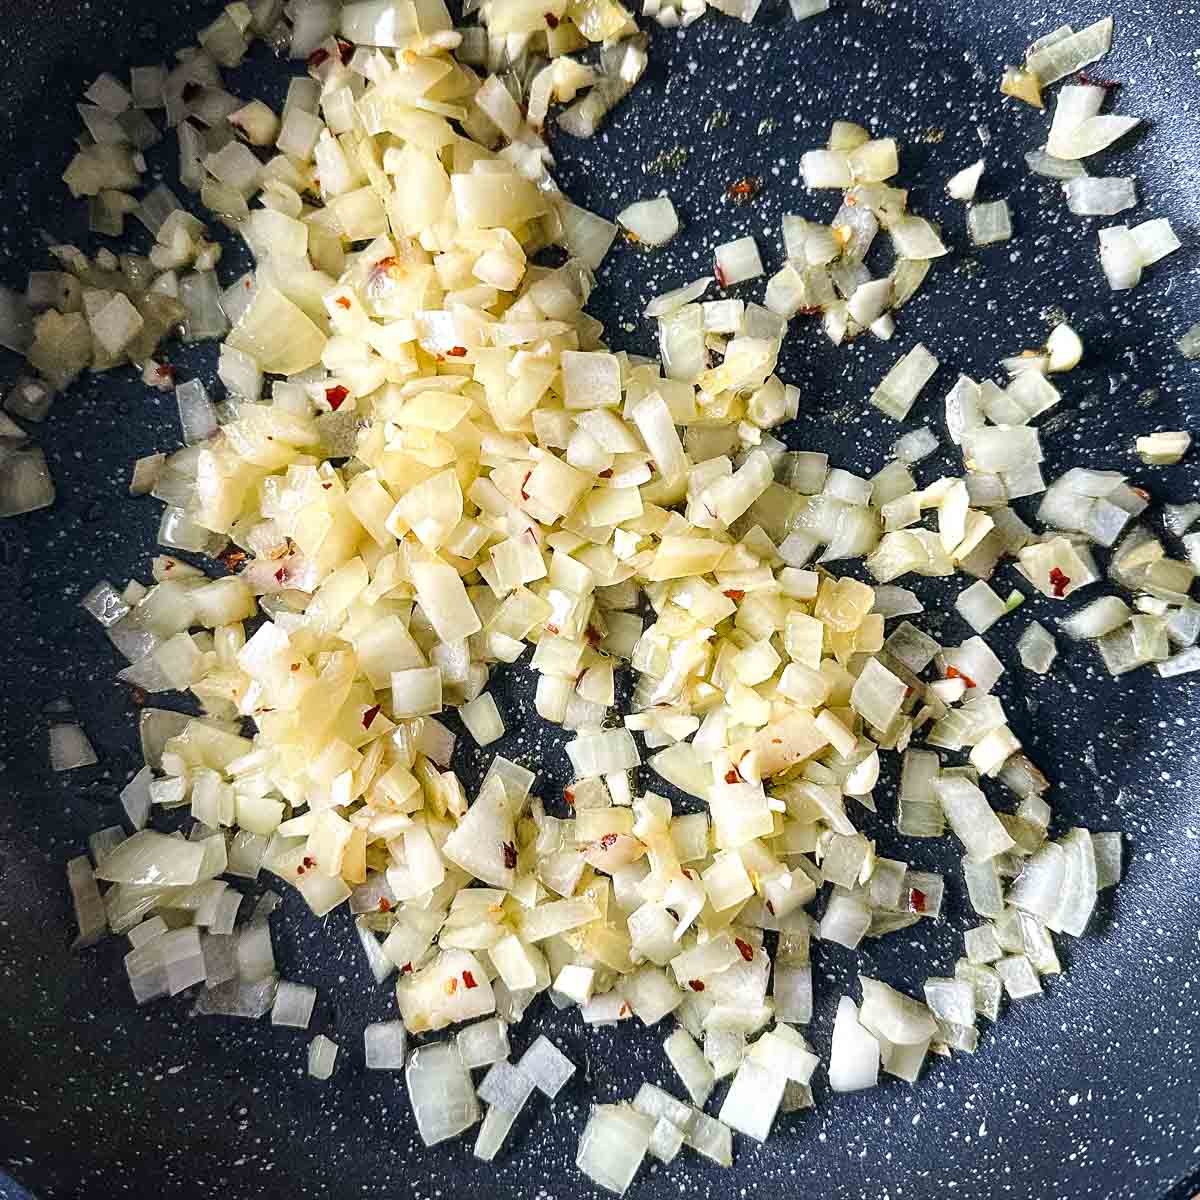 garlic and chili flakes are added to the onion sweating in a frying pan.